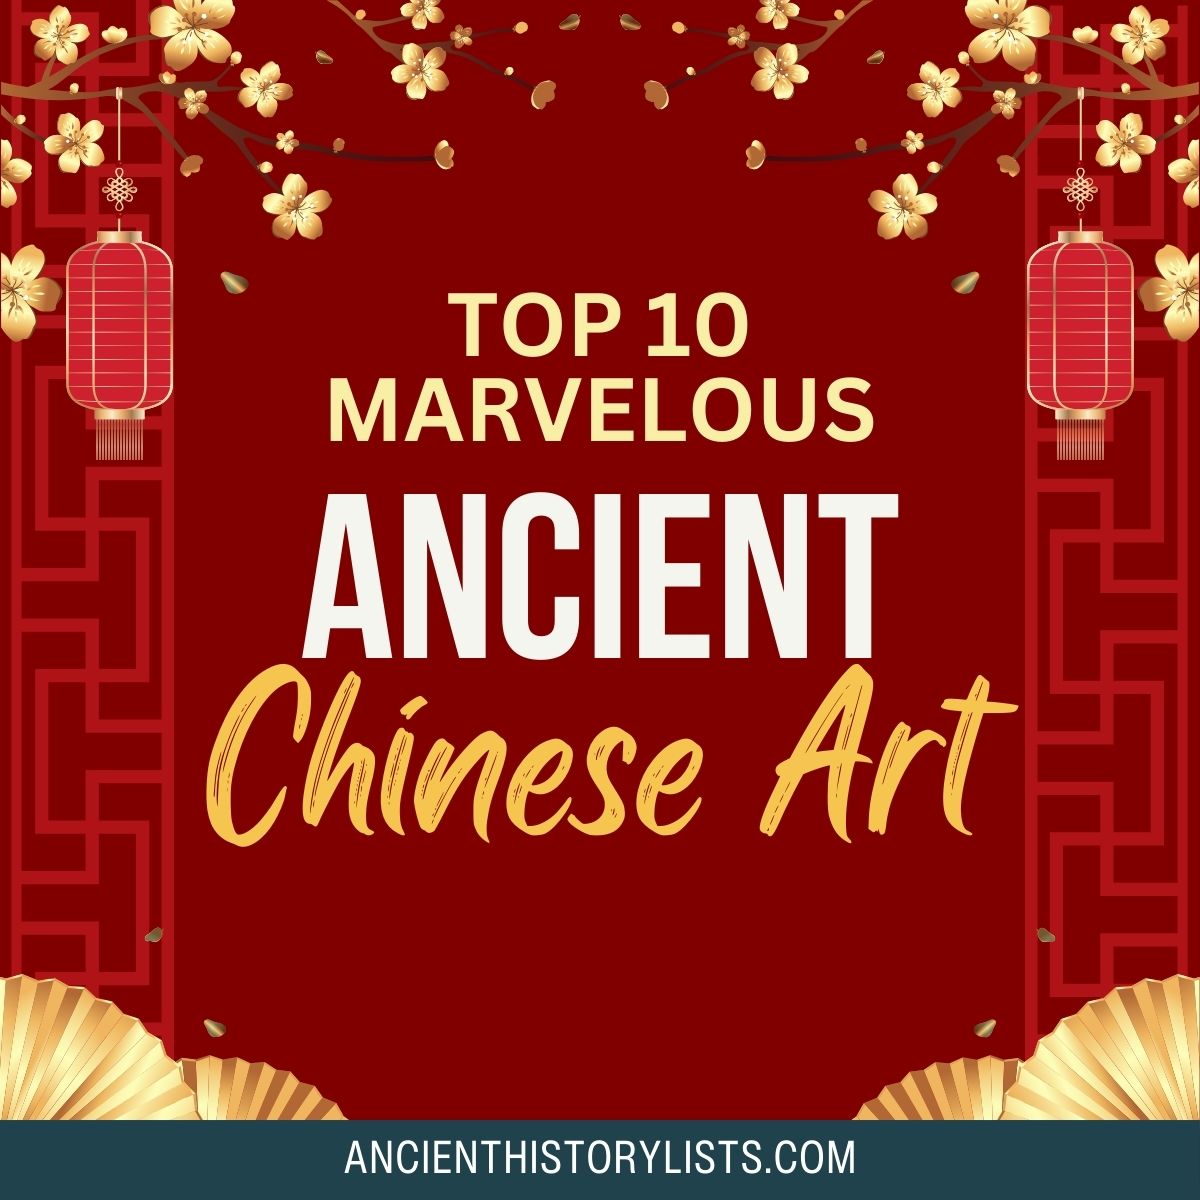 Marvelous Types of Ancient Chinese Art